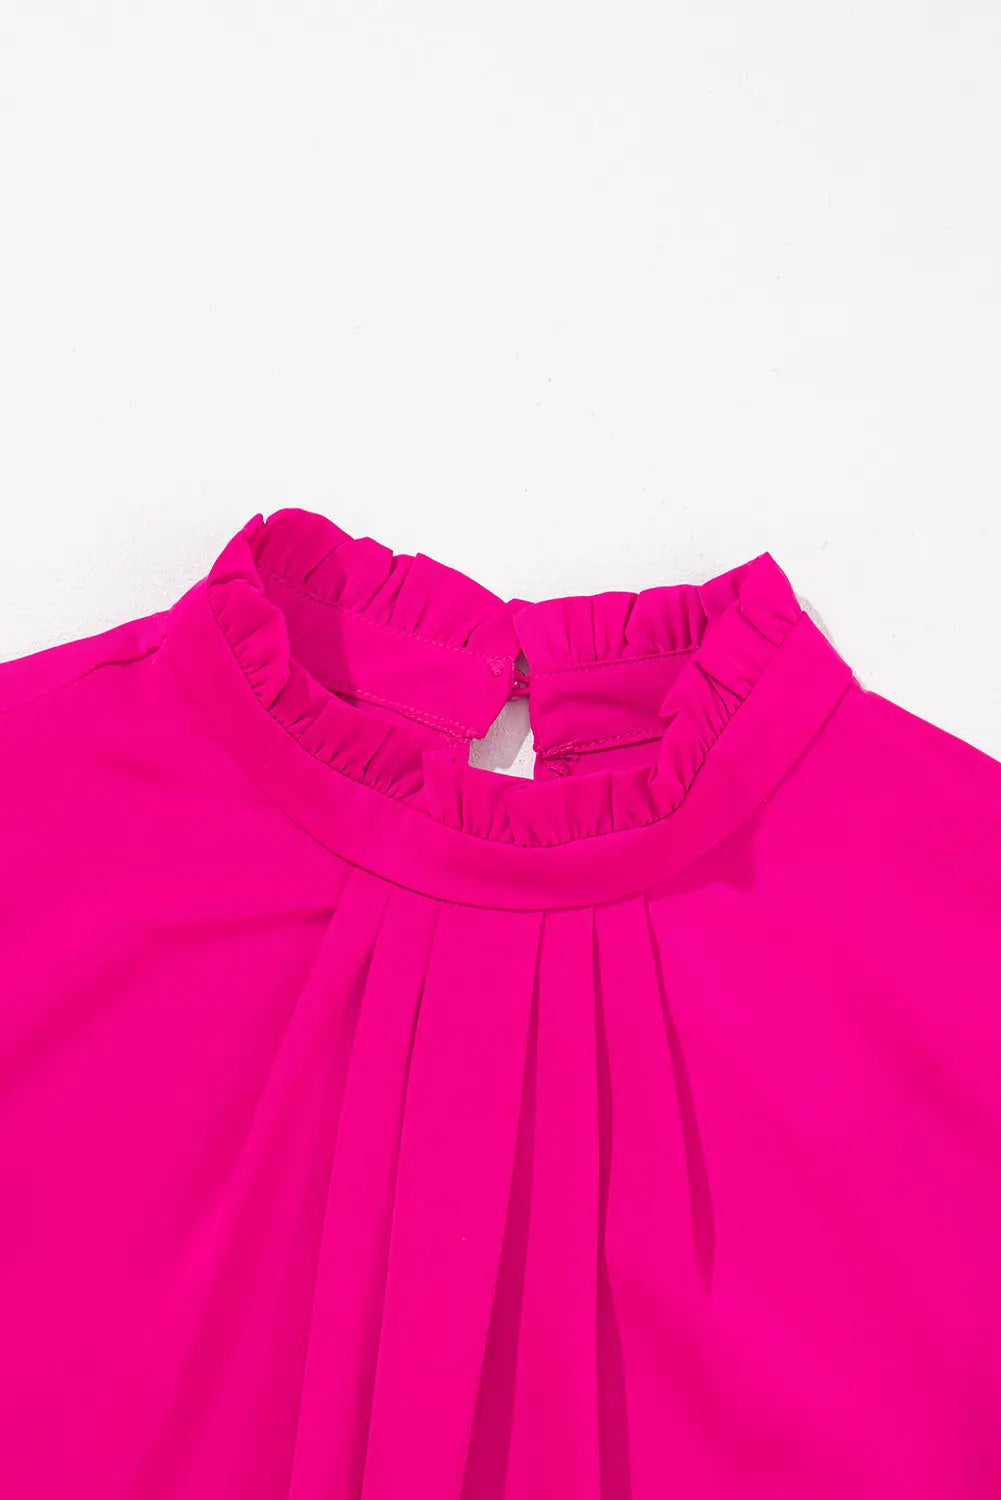 Bright pink pleated sleeveless top - tops/tank tops